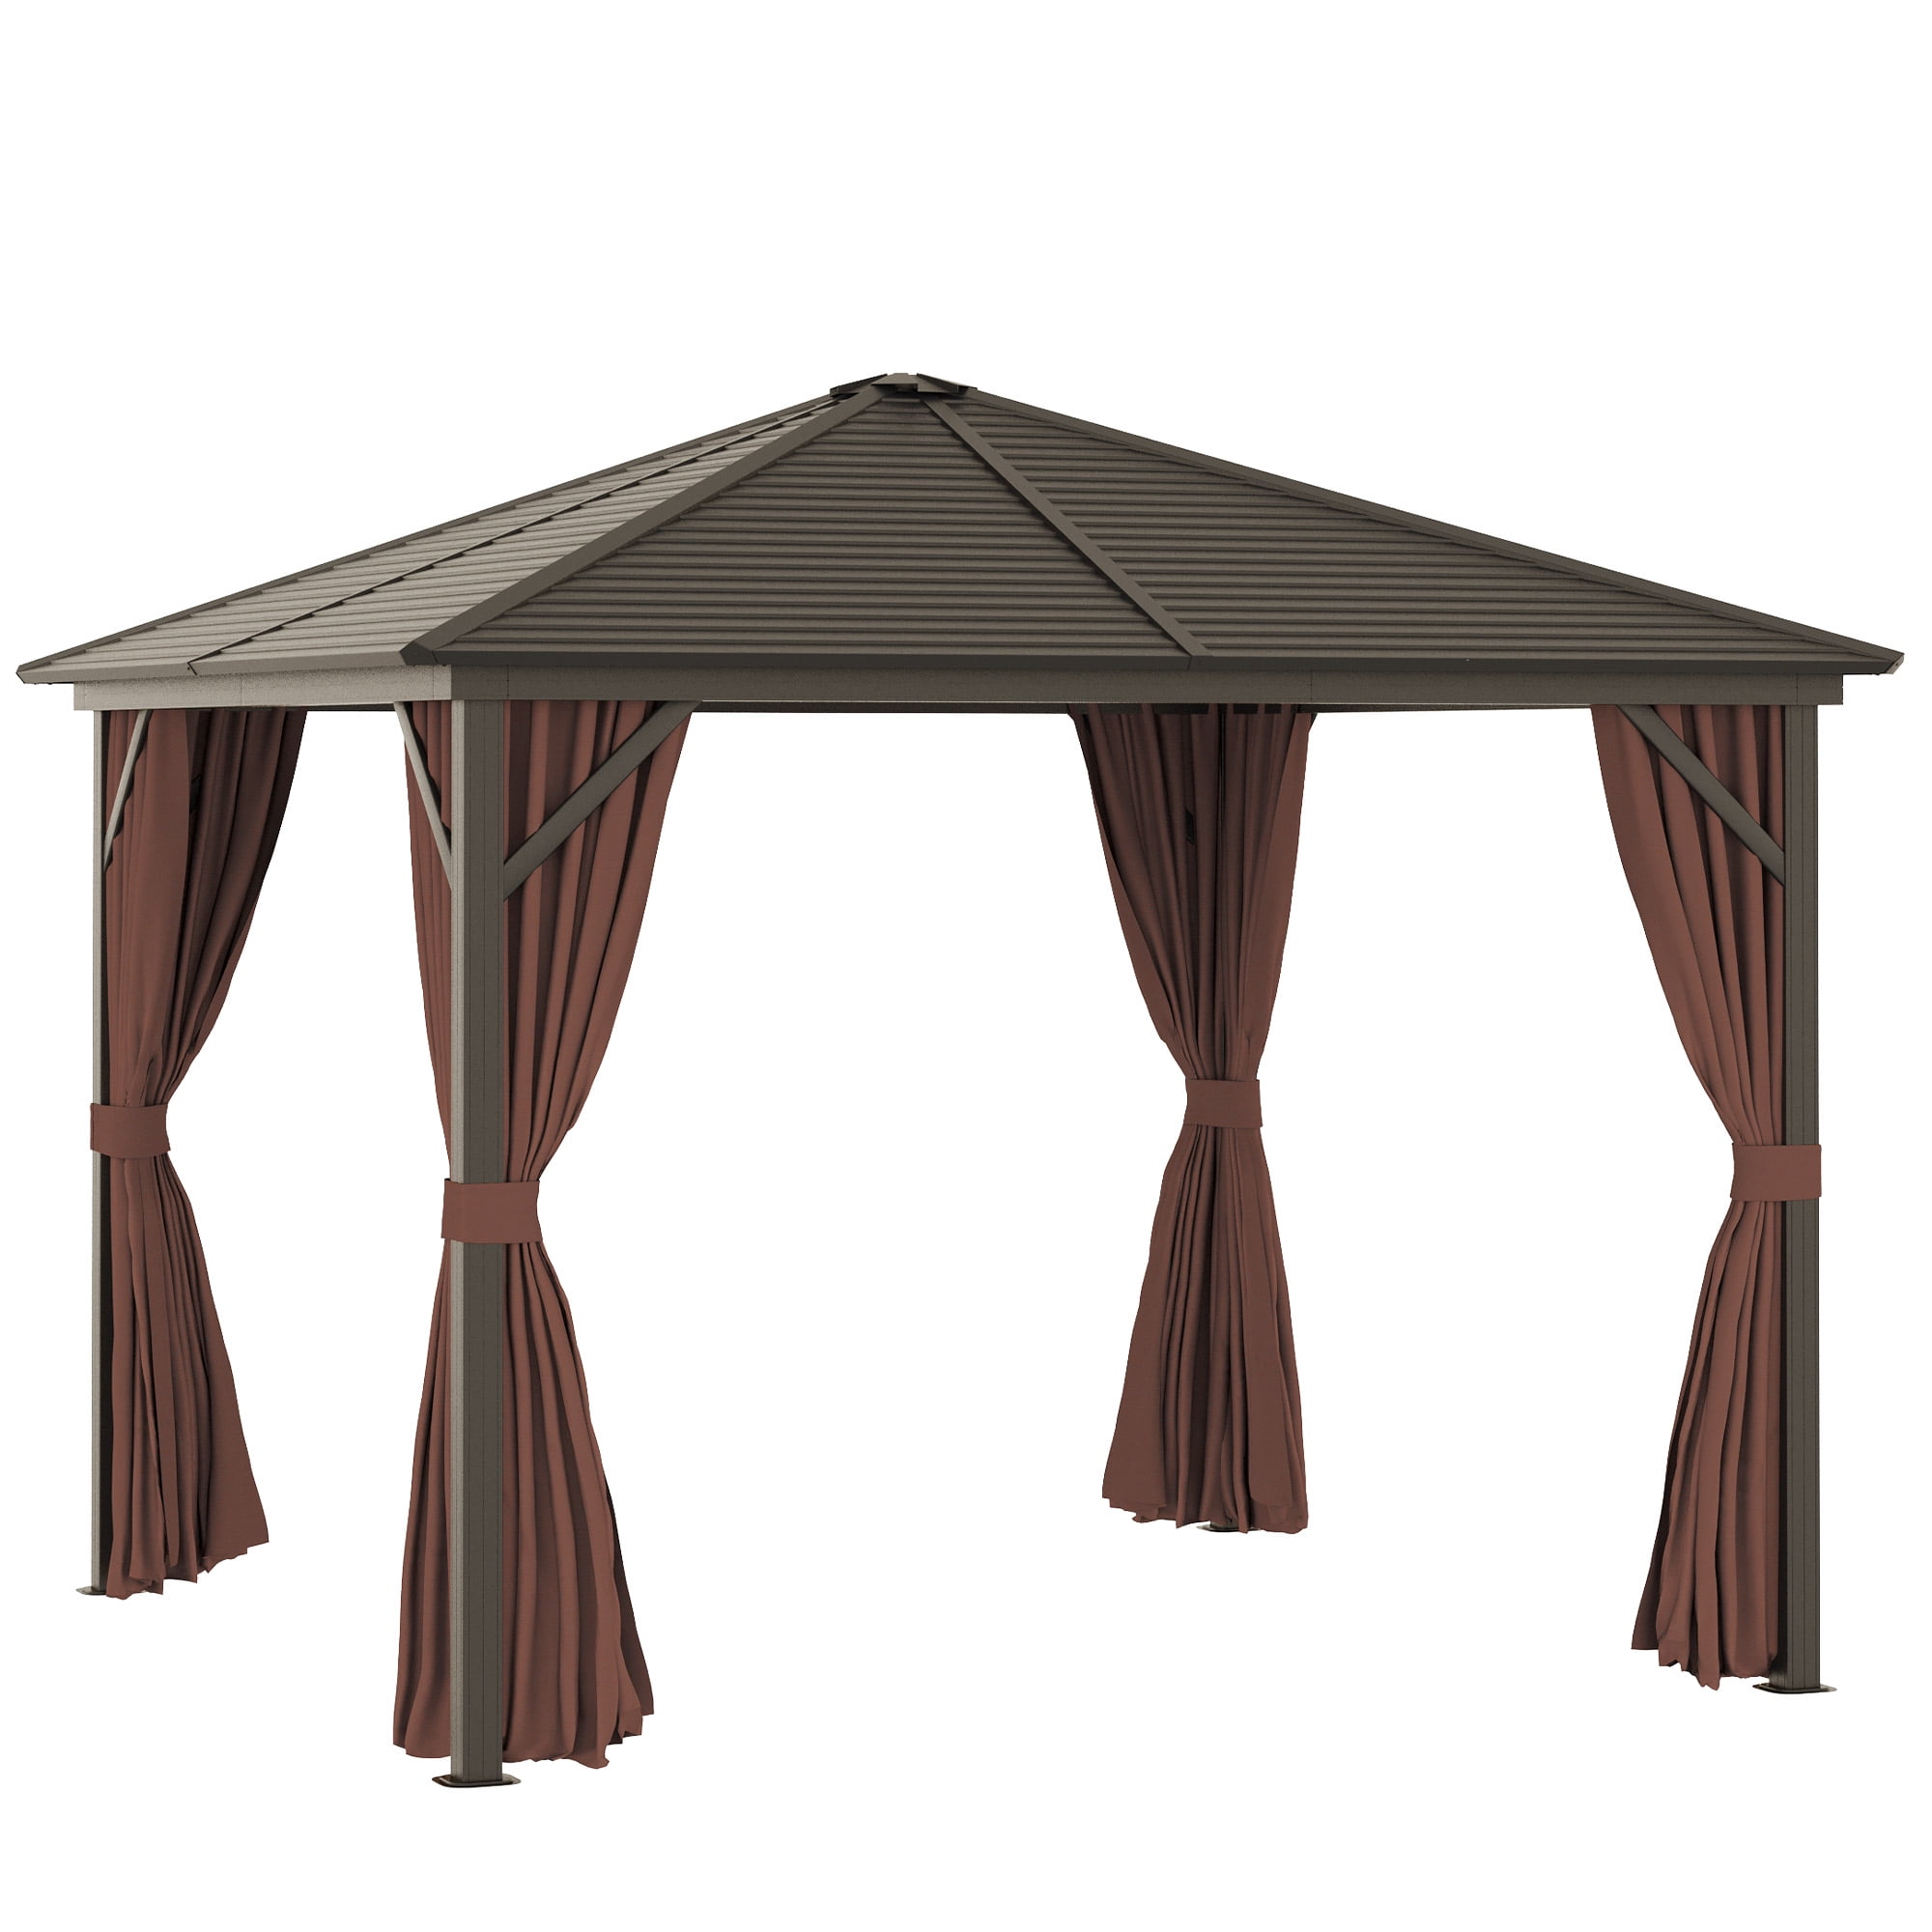 OutsunnyÂ 10' x 10'Â HardtopÂ Gazebo with Curtains and Netting, Permanent Pavilion Metal Roof Gazebo Canopy with Aluminum Frame, for Garden, Patio, Backyard, Deck, Dark Brown